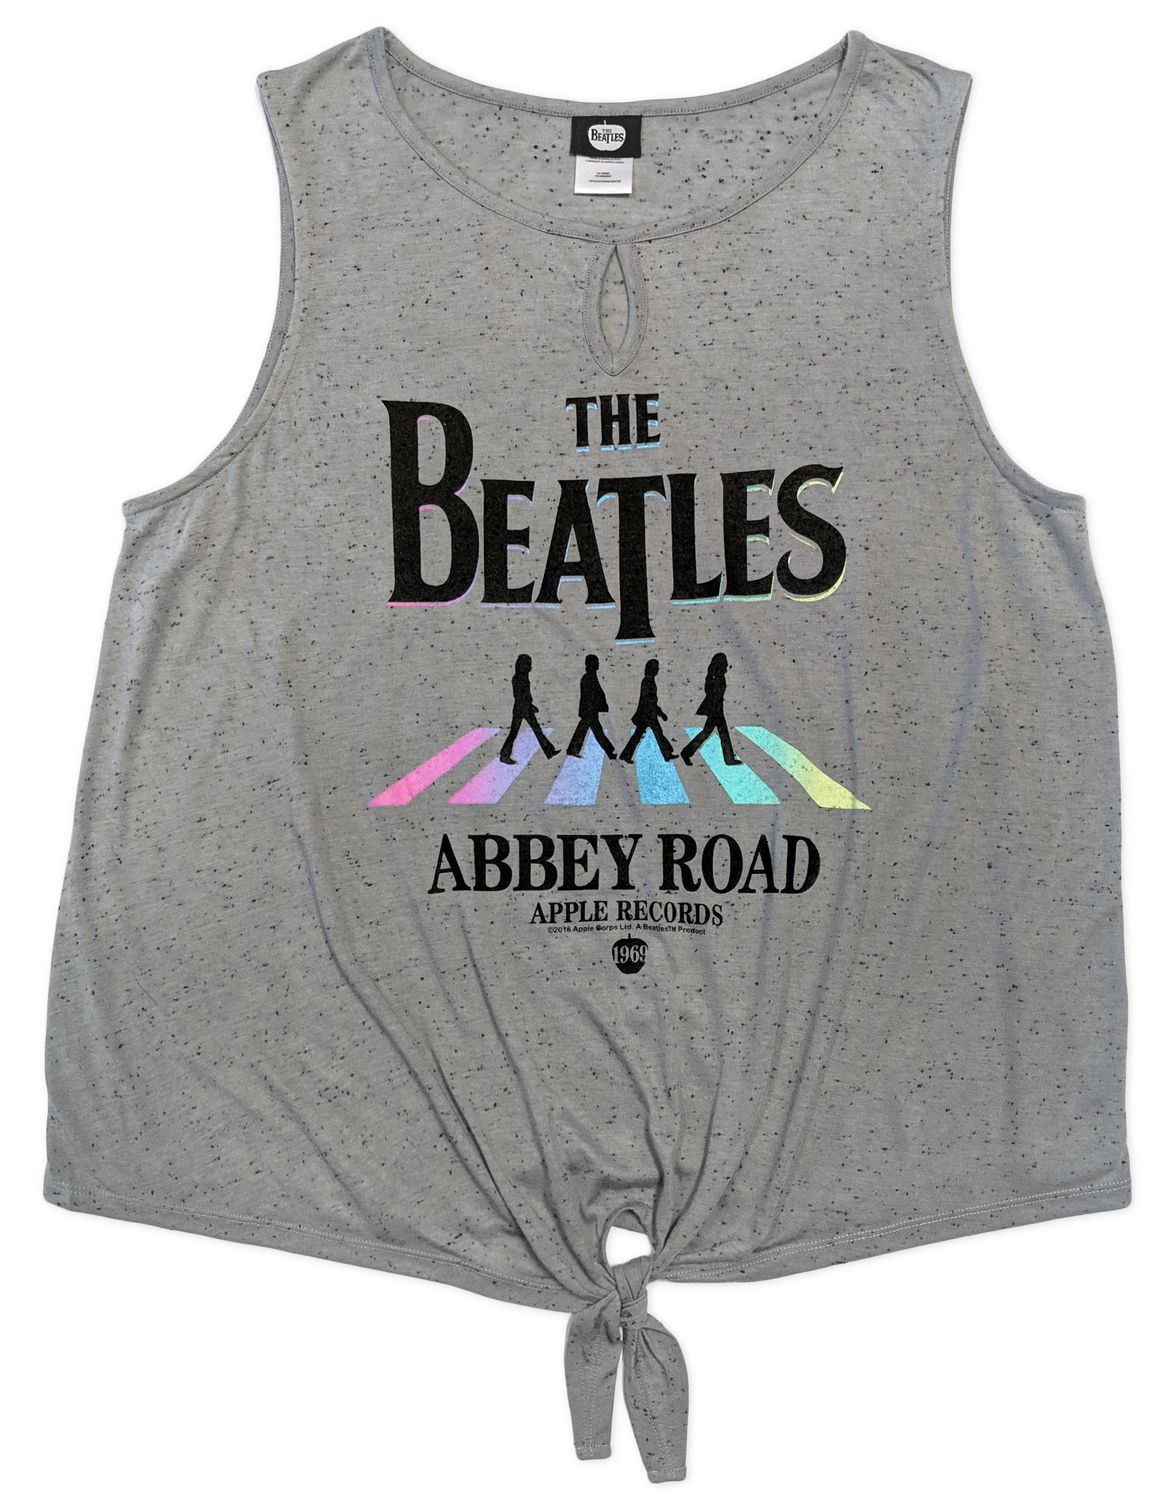 The Beatles Women's Plus Size Knotted Tank Top | Walmart Canada